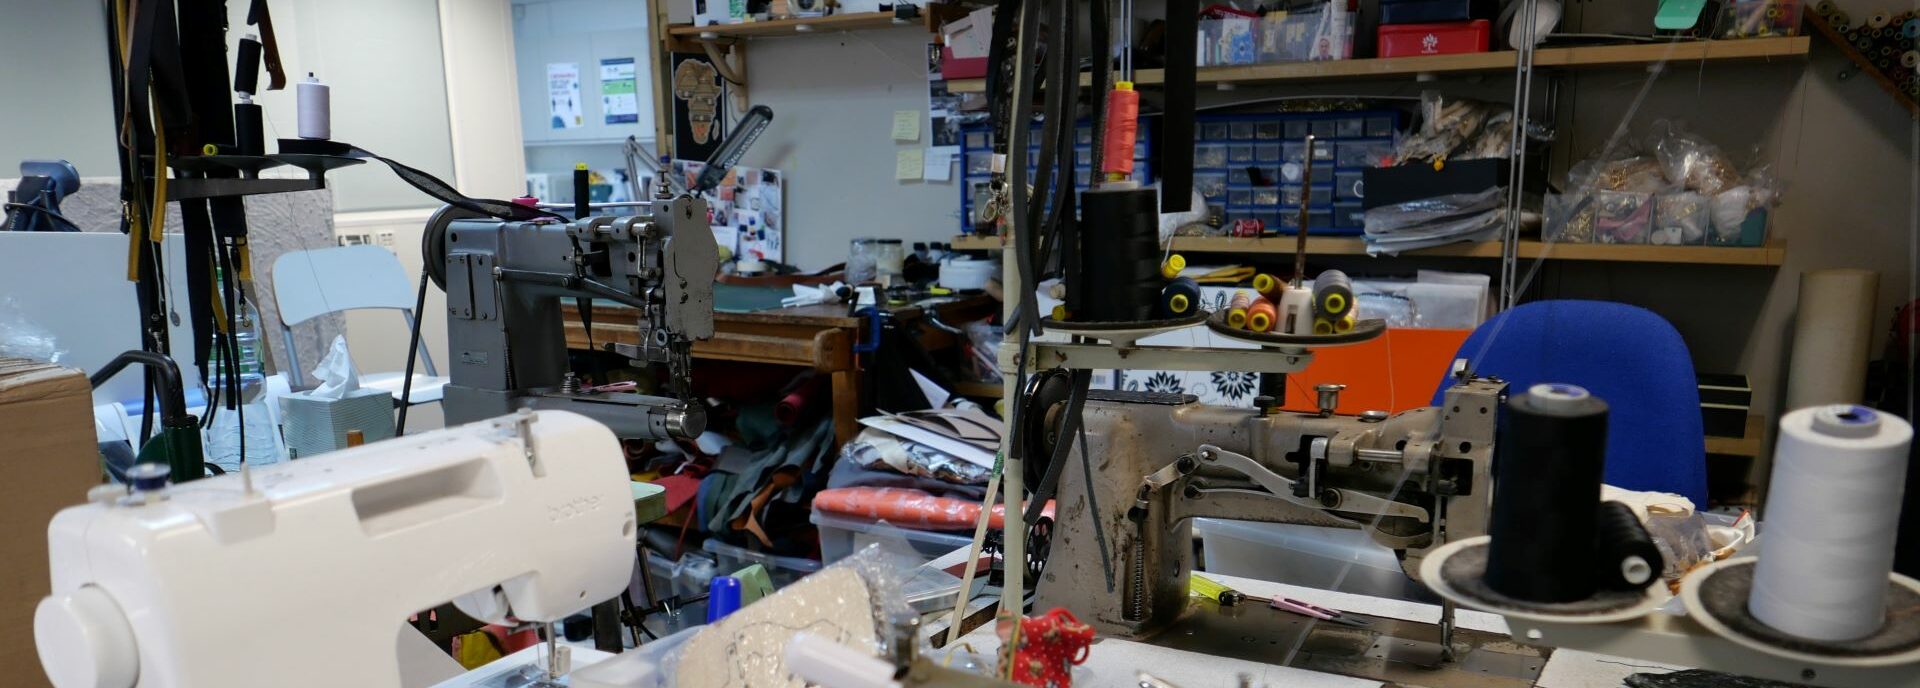 Sewing machines and fabric fill up a studio